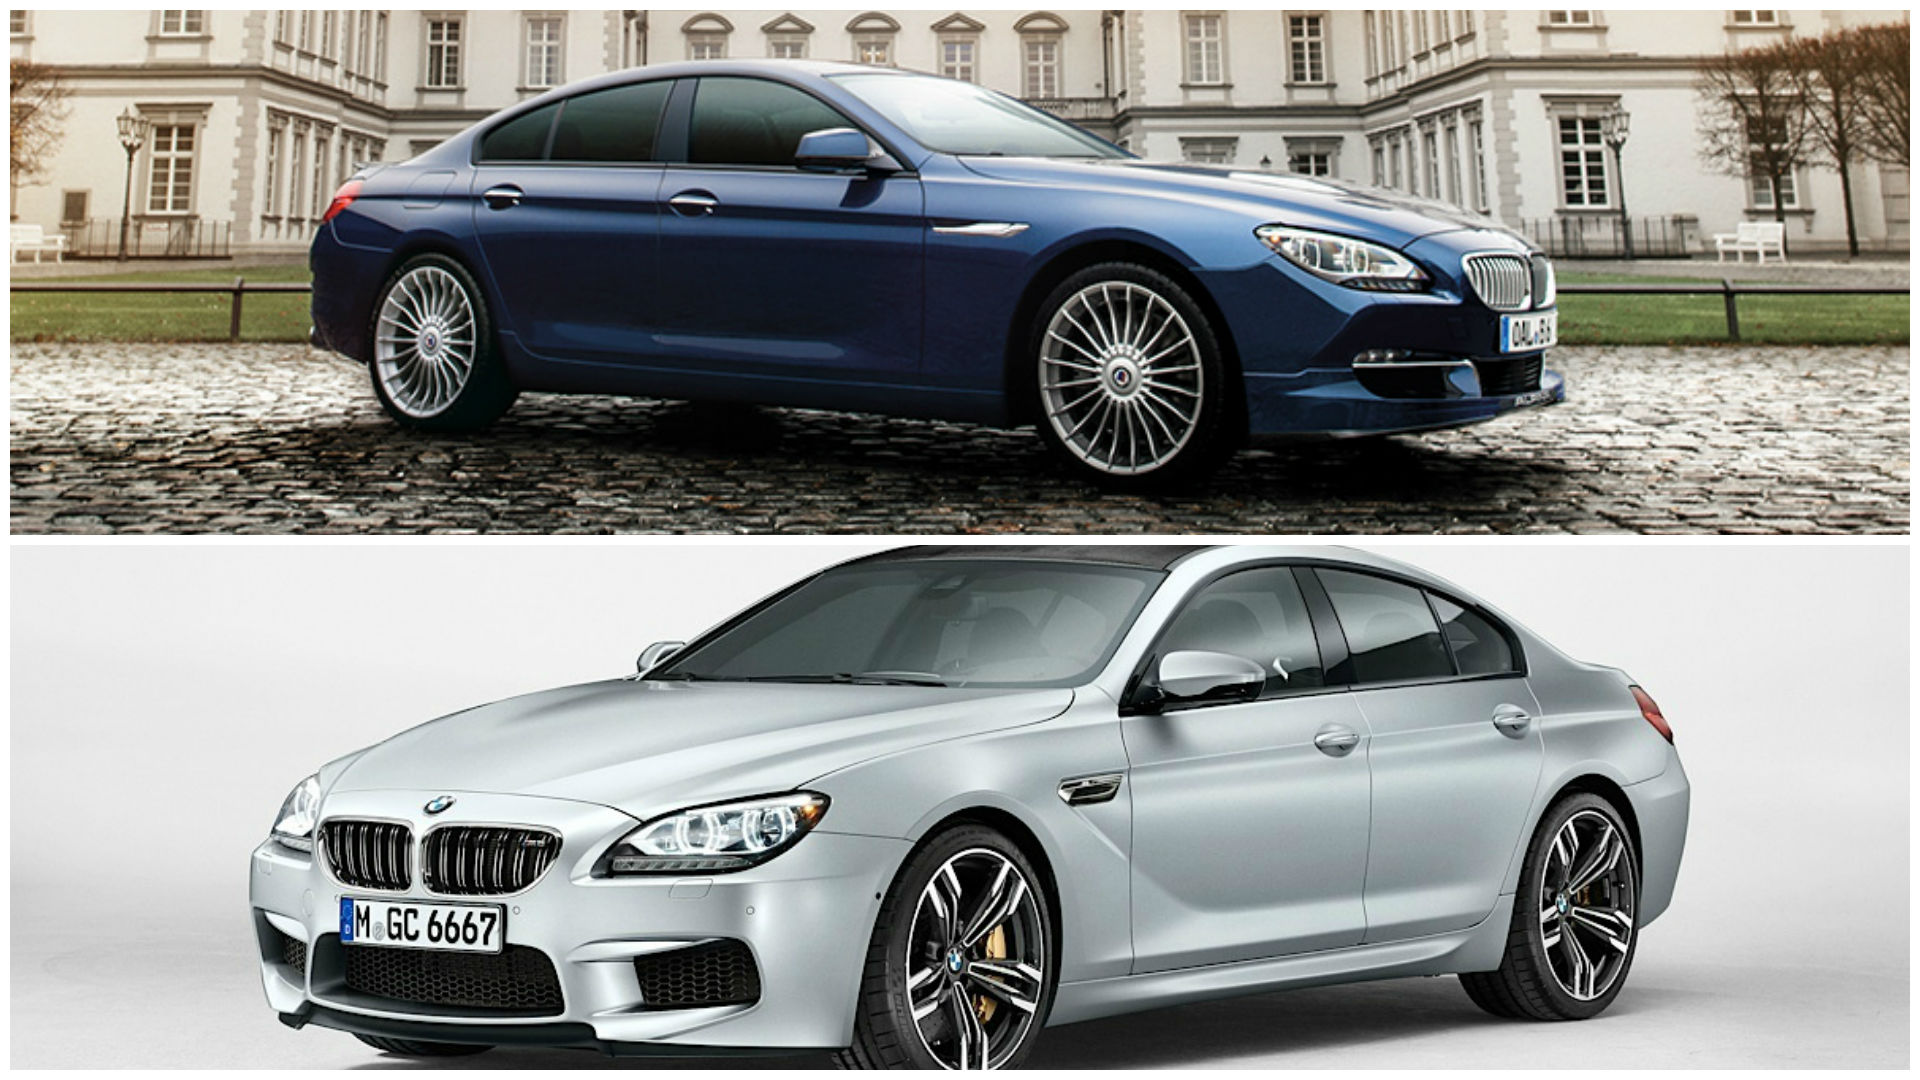 Compare : M6 VS B6 WHICH IS THE BEST BMW 6 SERIES ?